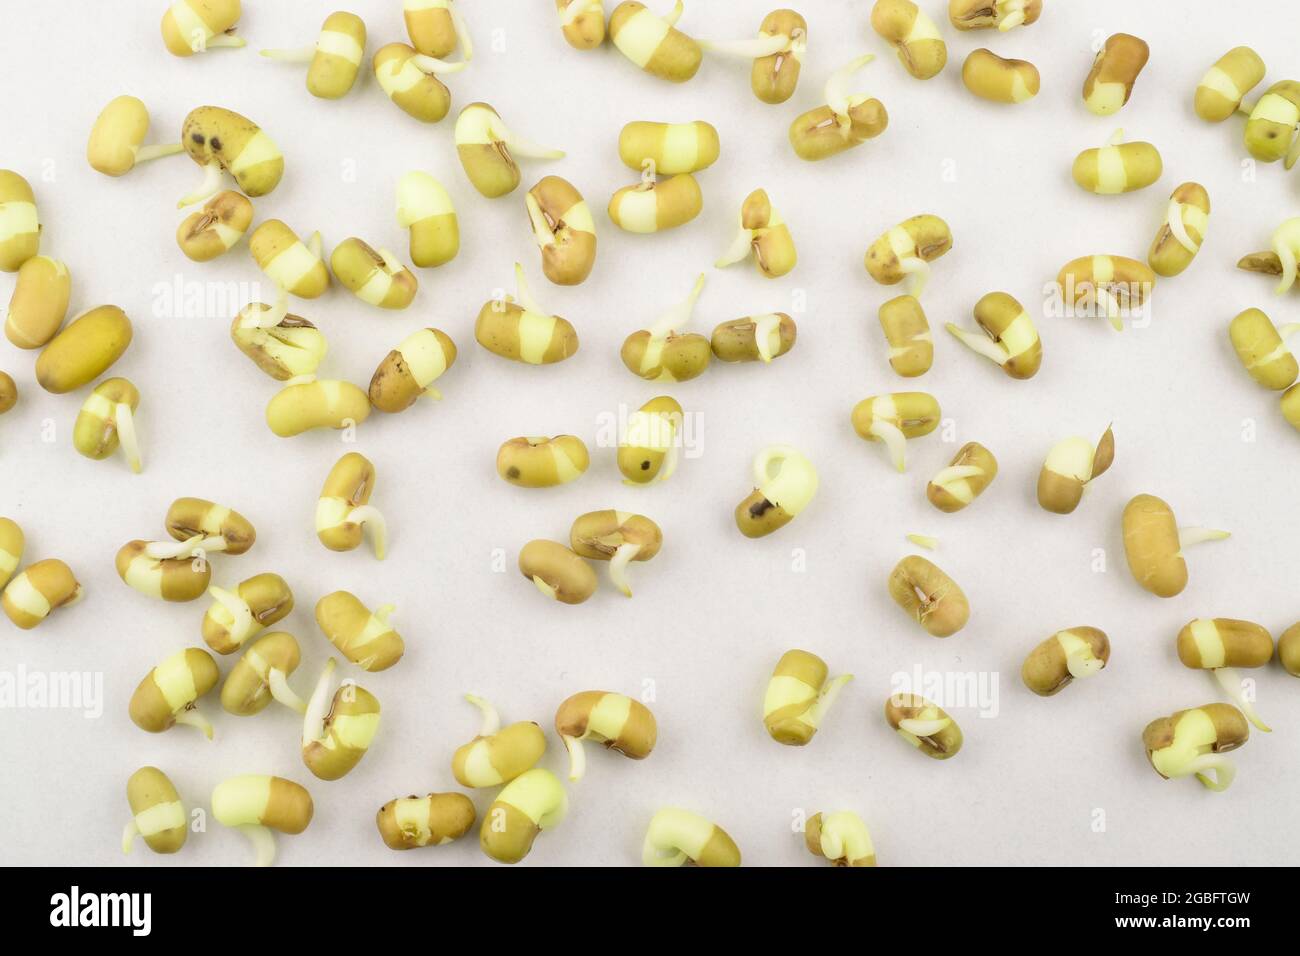 Mung Bean Sprouts Scattered On White Background Stock Photo